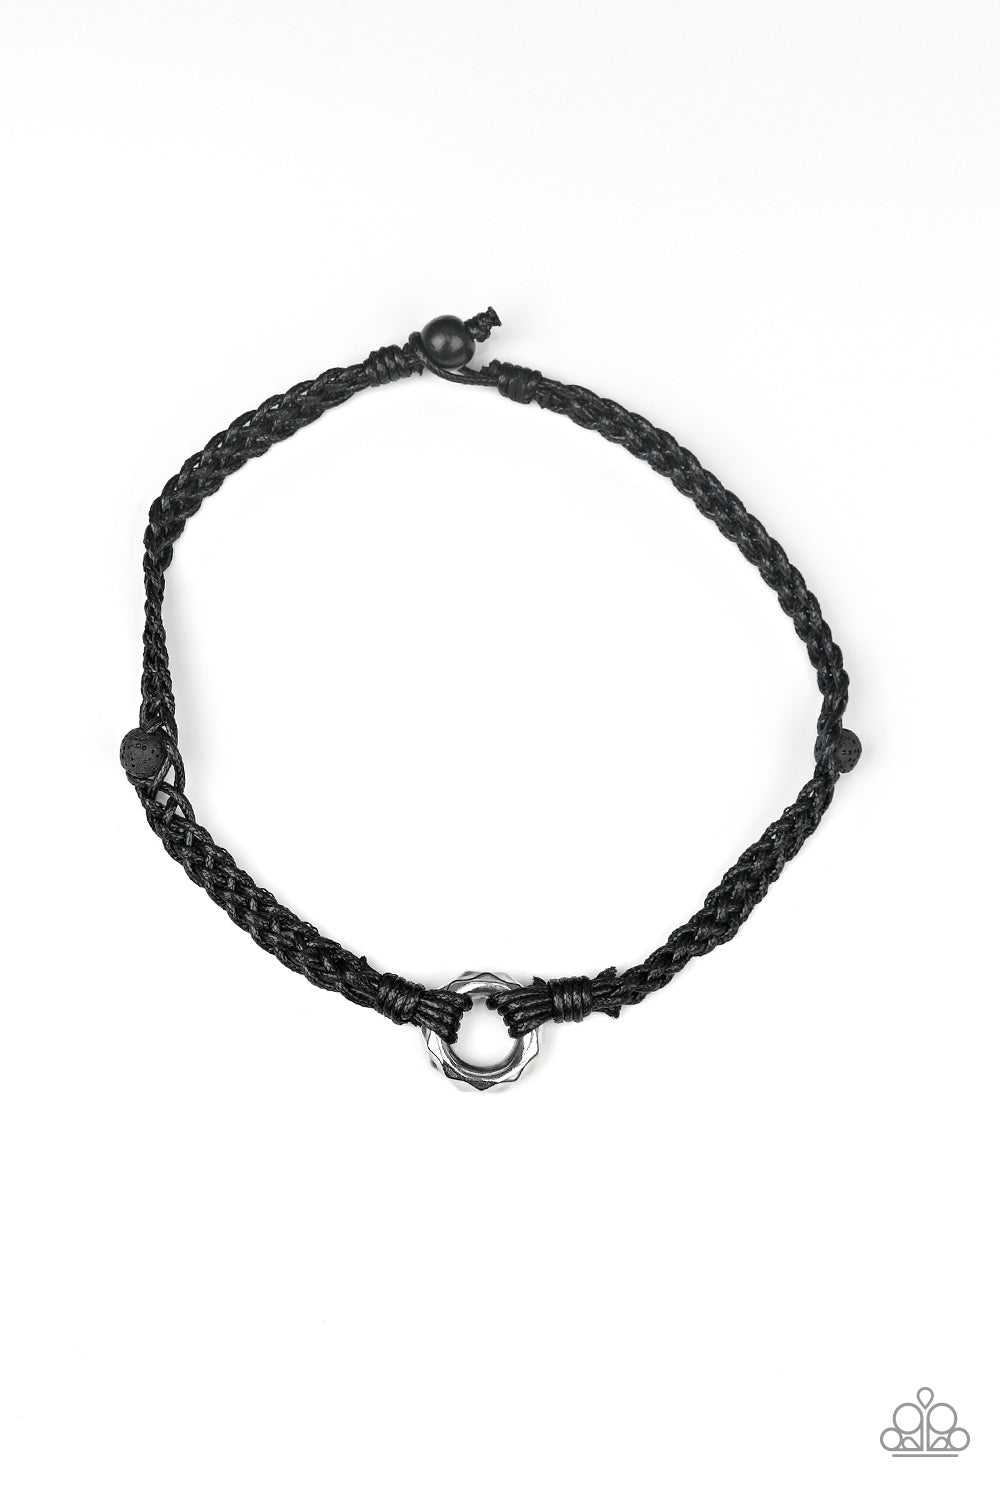 Basic Backpacker Black Urban Necklace - Paparazzi Accessories